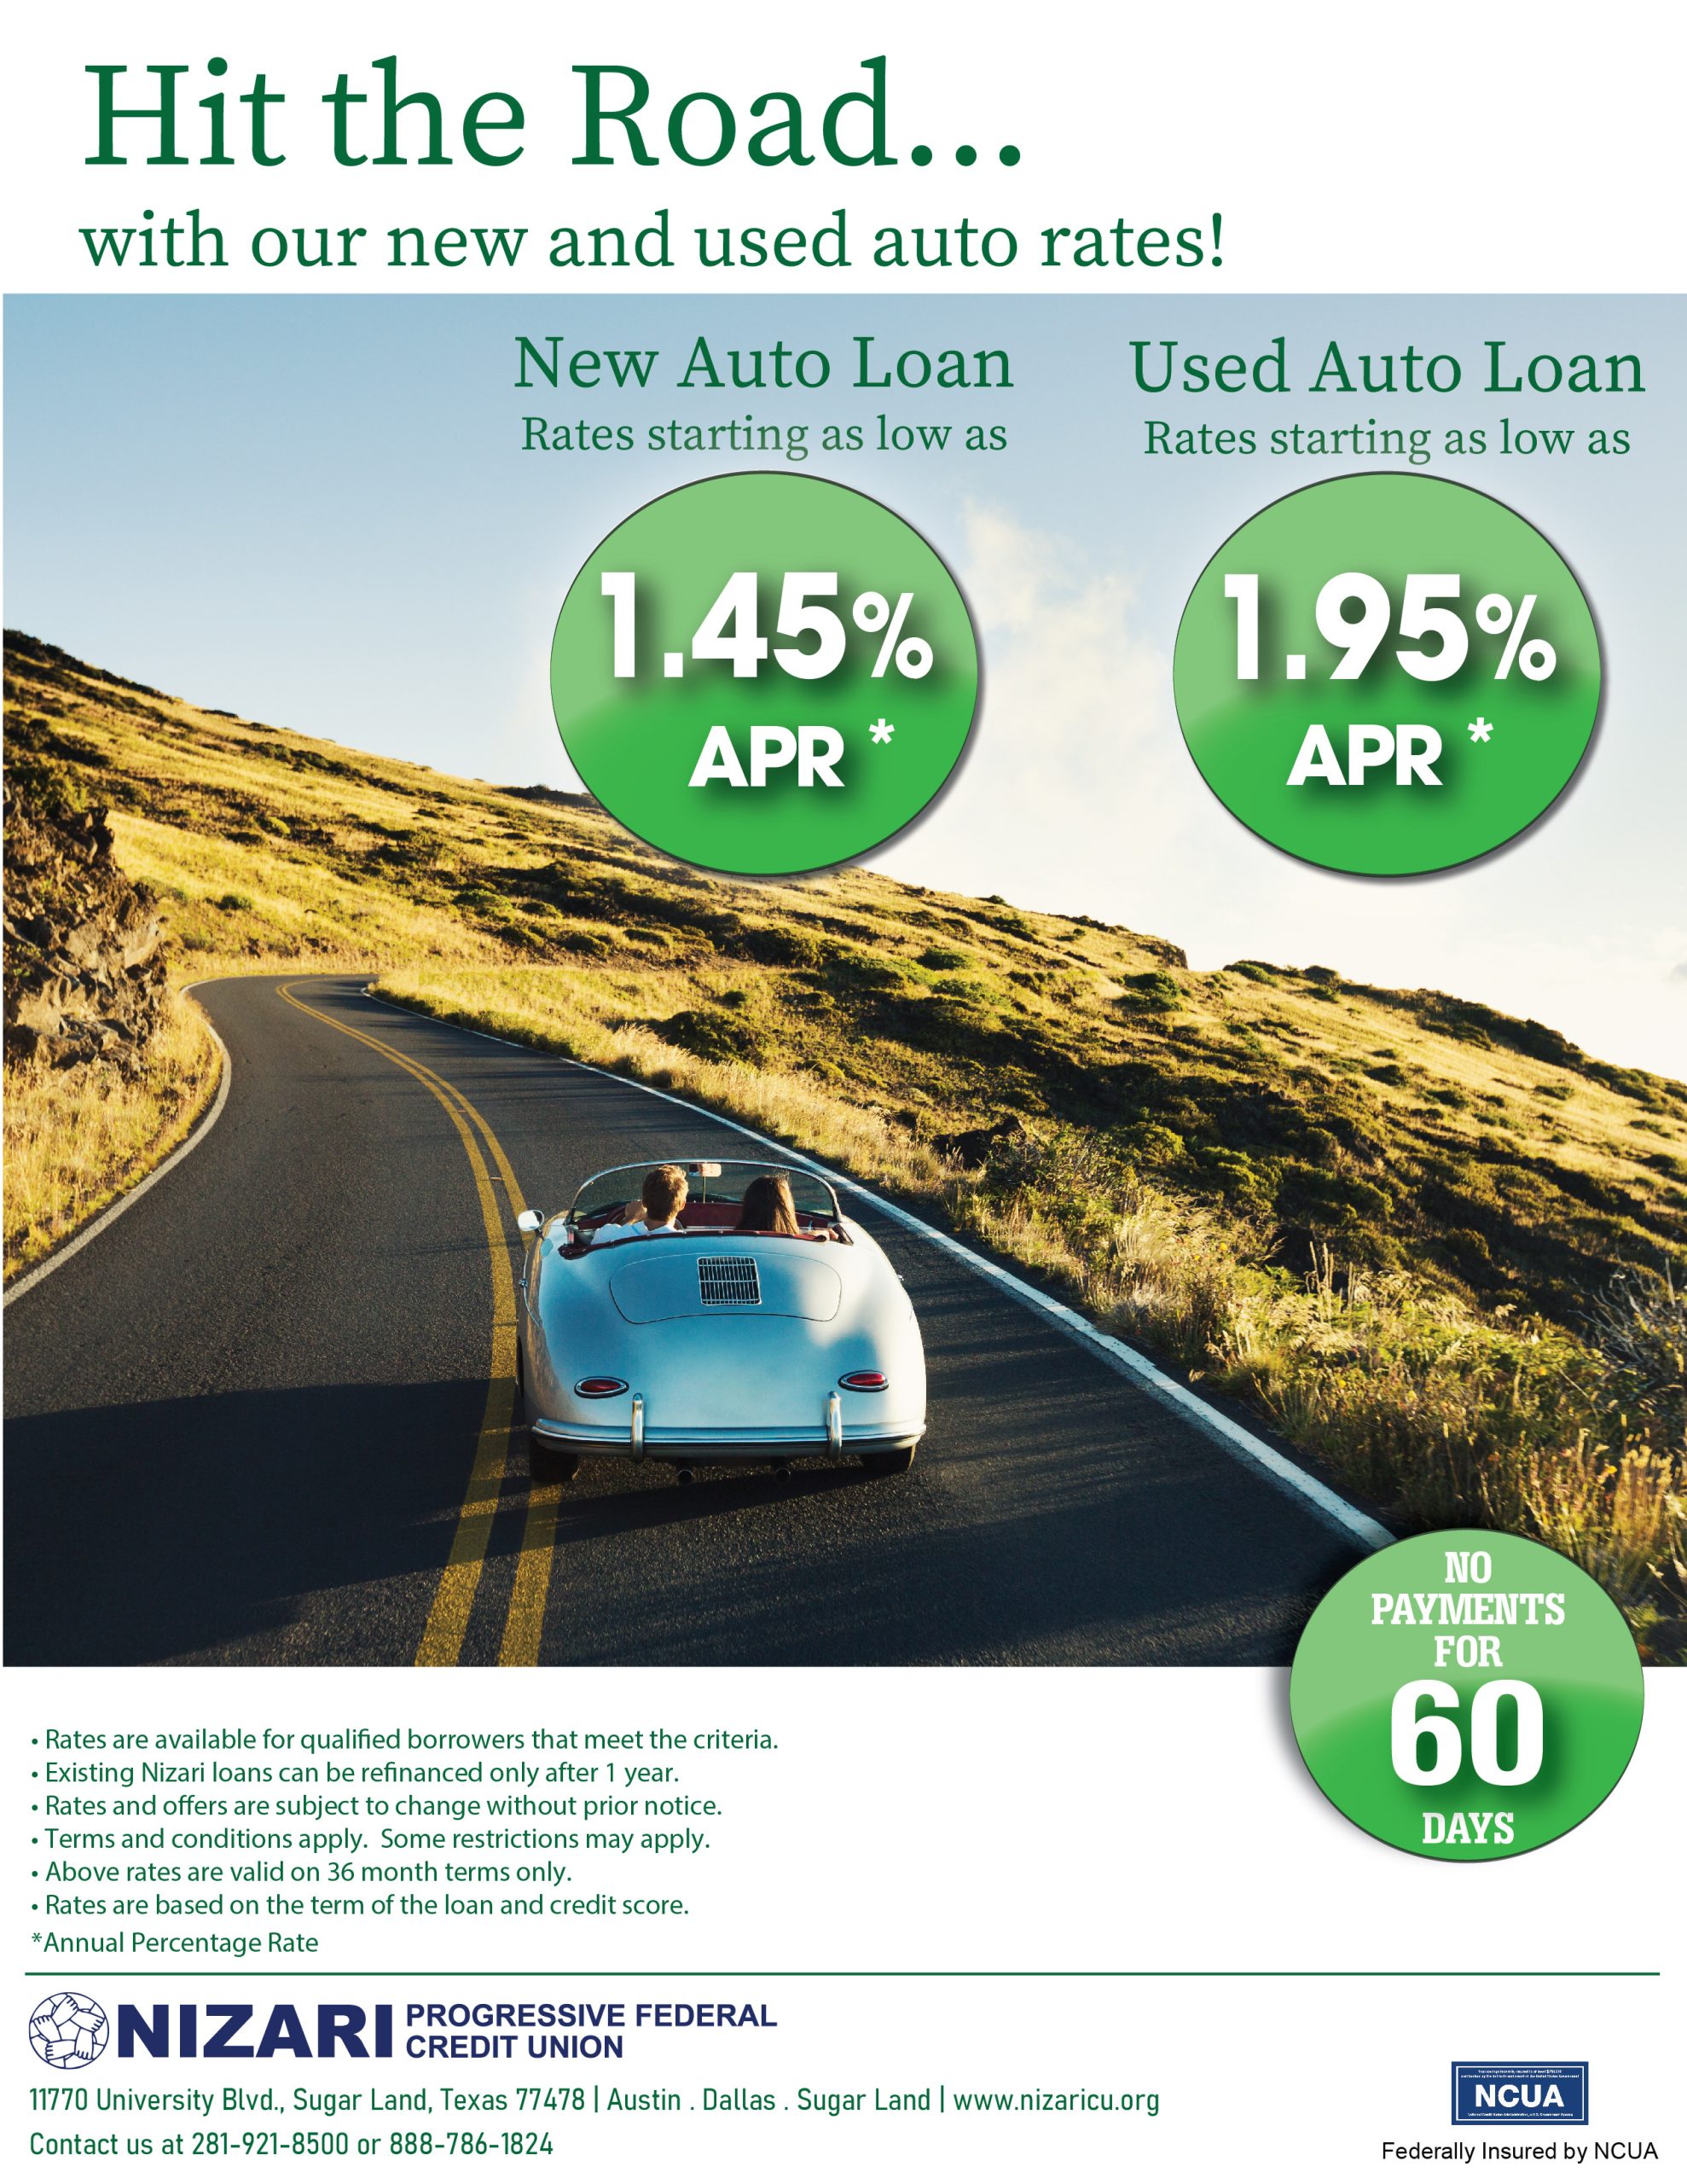 arrange out of state car loan